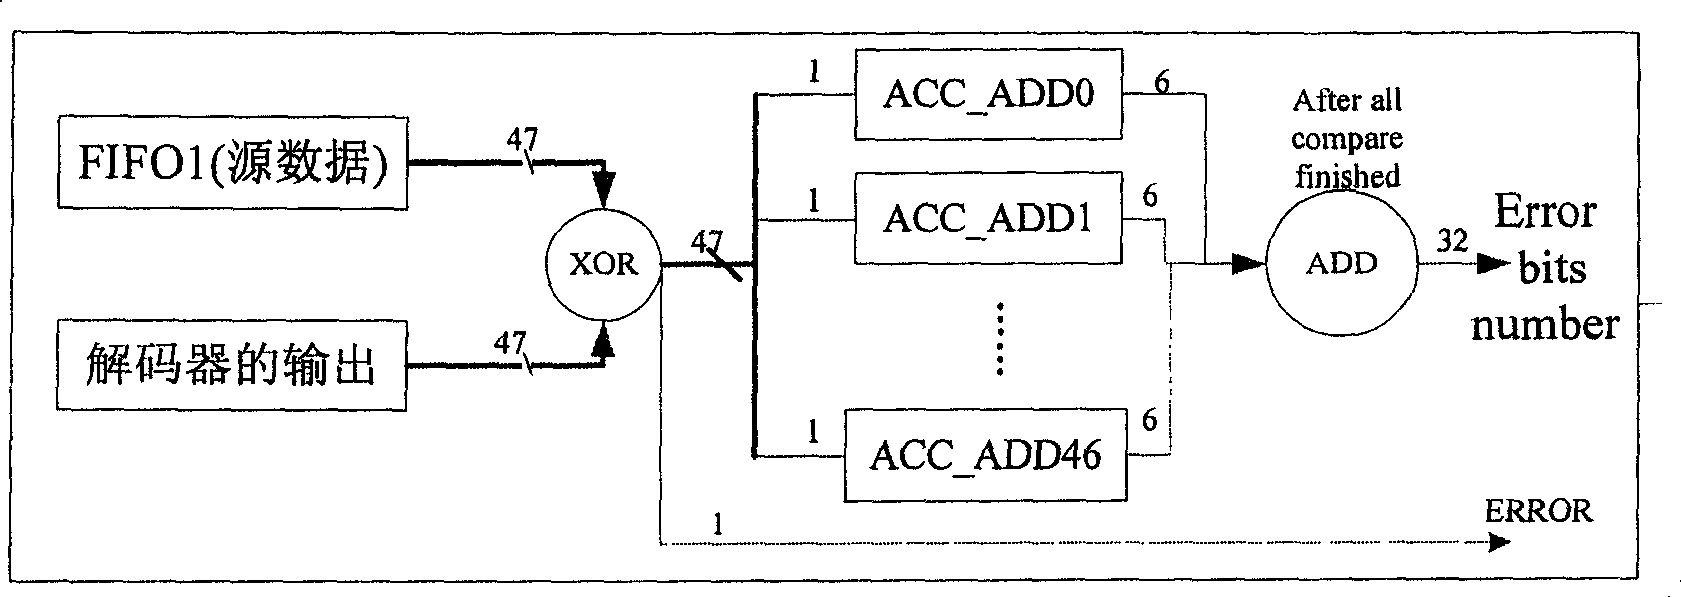 Low-density odd-even checking codec hardware simulation system based on programmable gate array